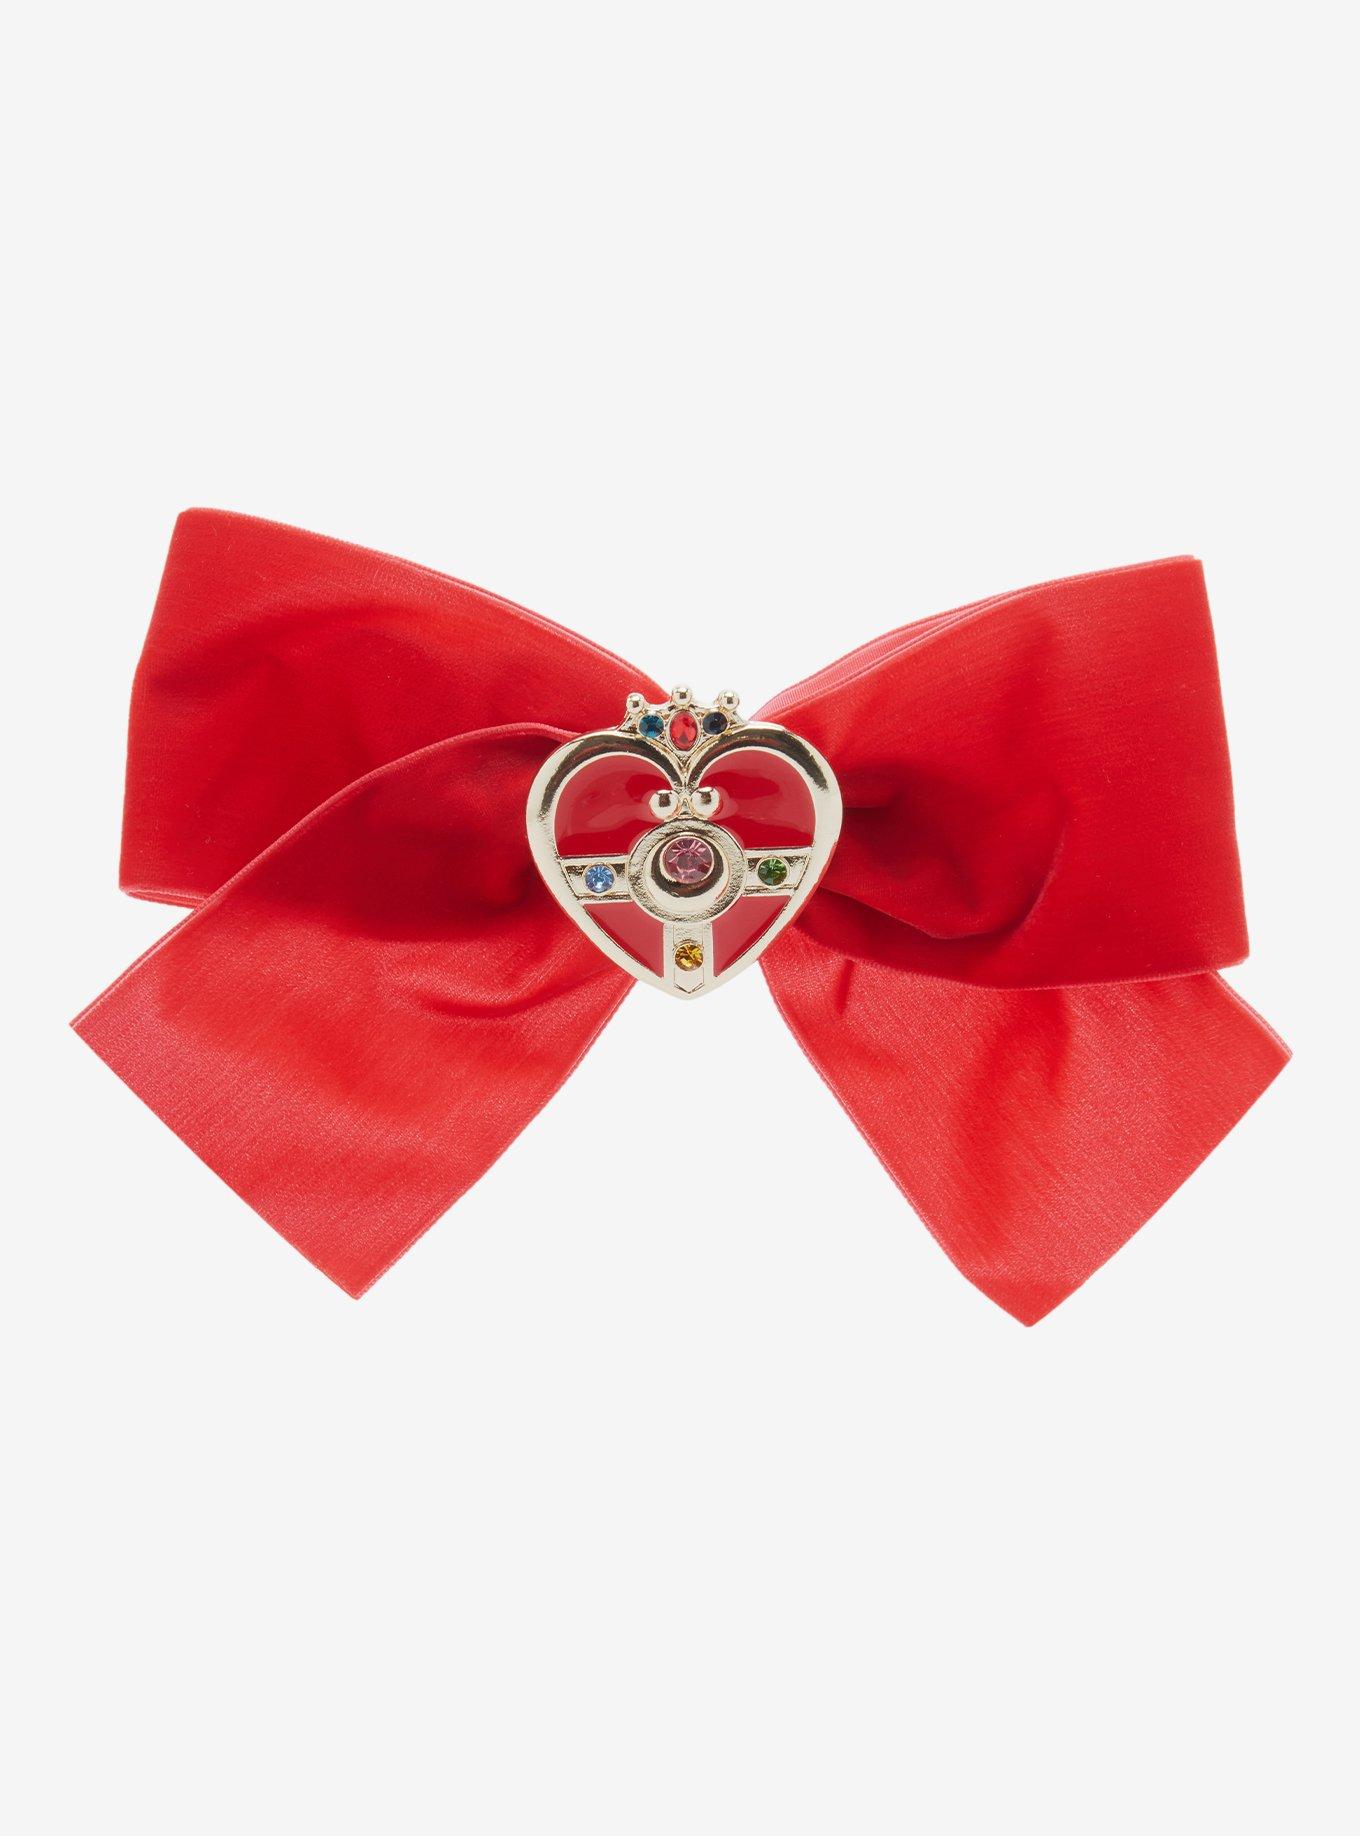 Sailor Moon Collar and Front Bow